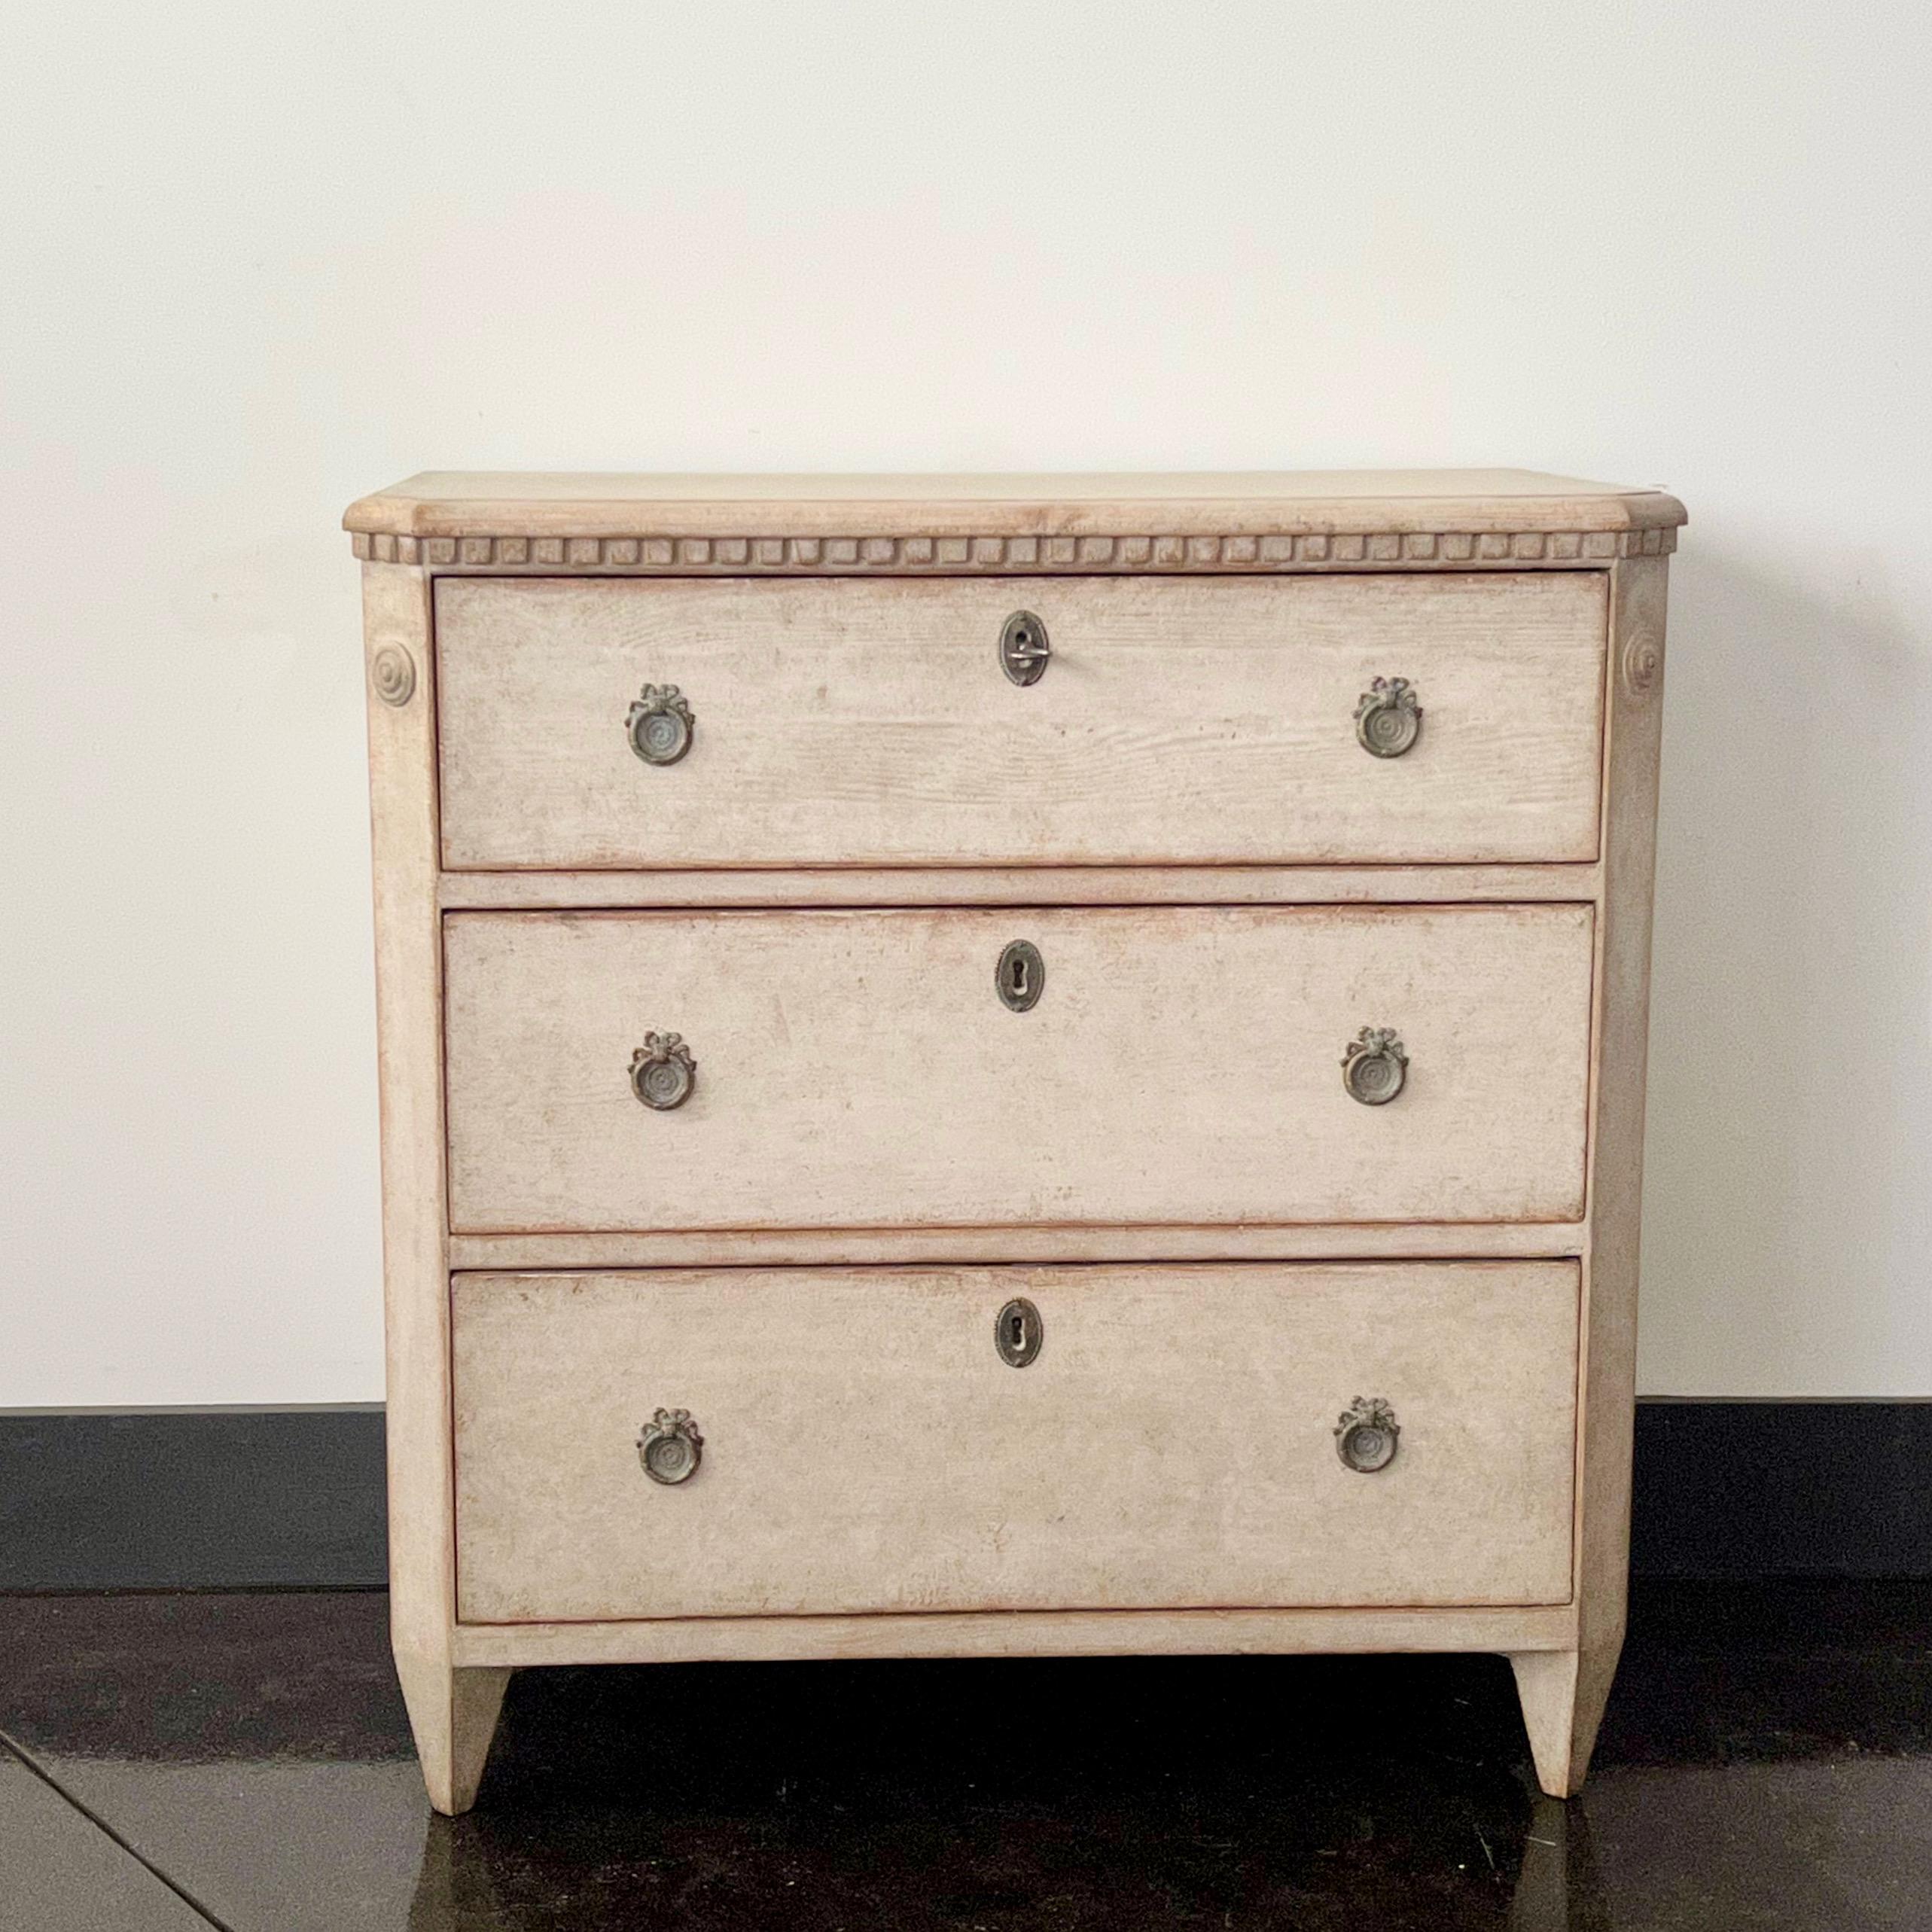 Handsome Swedish Gustavian style chest of three drawers canted corners with rosettes and dentil moldings under the shaped top on tapered feet.
Sweden, circa 1850.
 